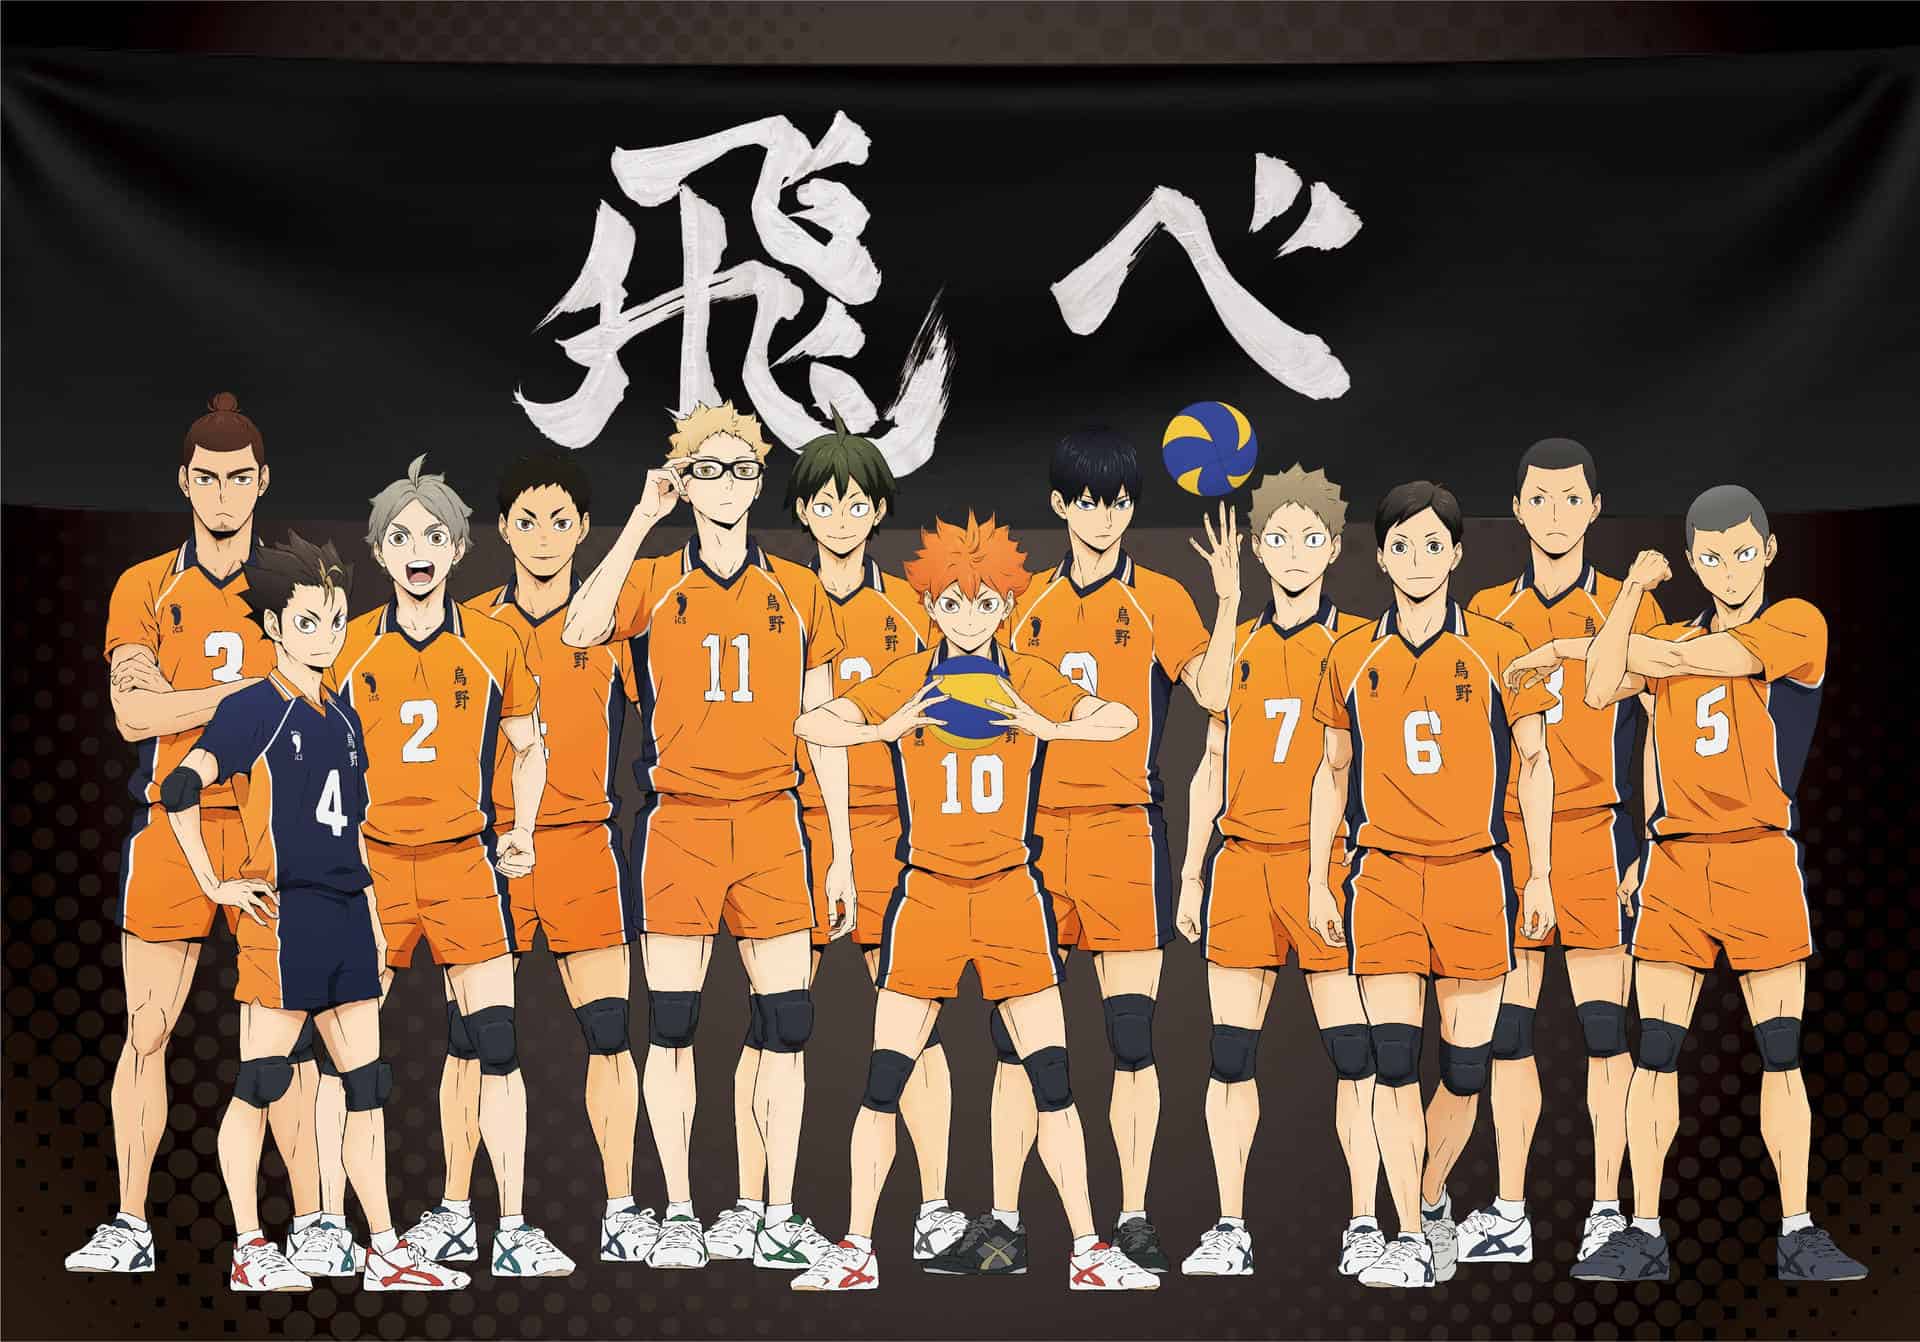 How to watch Haikyuu!! in order